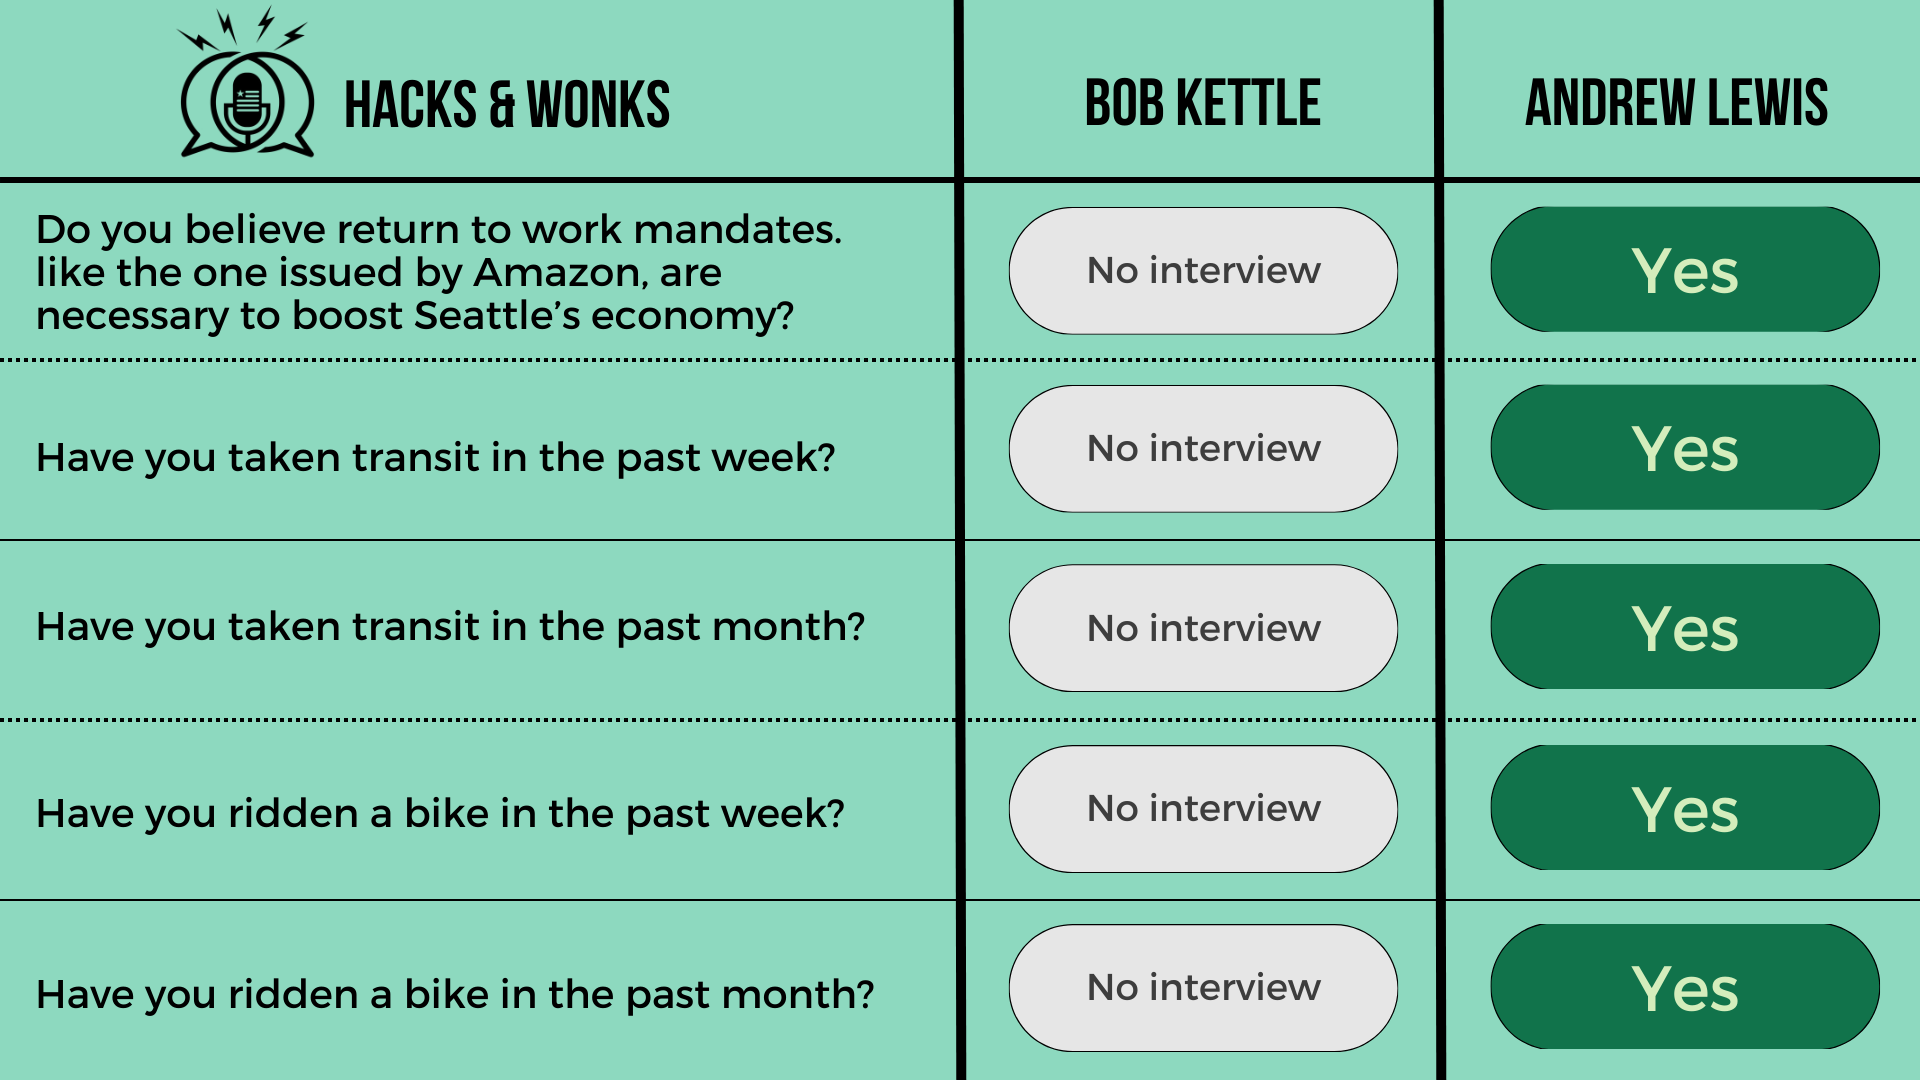 Q: Do you believe return to work mandates. like the one issued by Amazon, are necessary to boost Seattle’s economy? Bob Kettle: No interview, Andrew Lewis: Yes  Q: Have you taken transit in the past week? Bob Kettle: No interview, Andrew Lewis: Yes